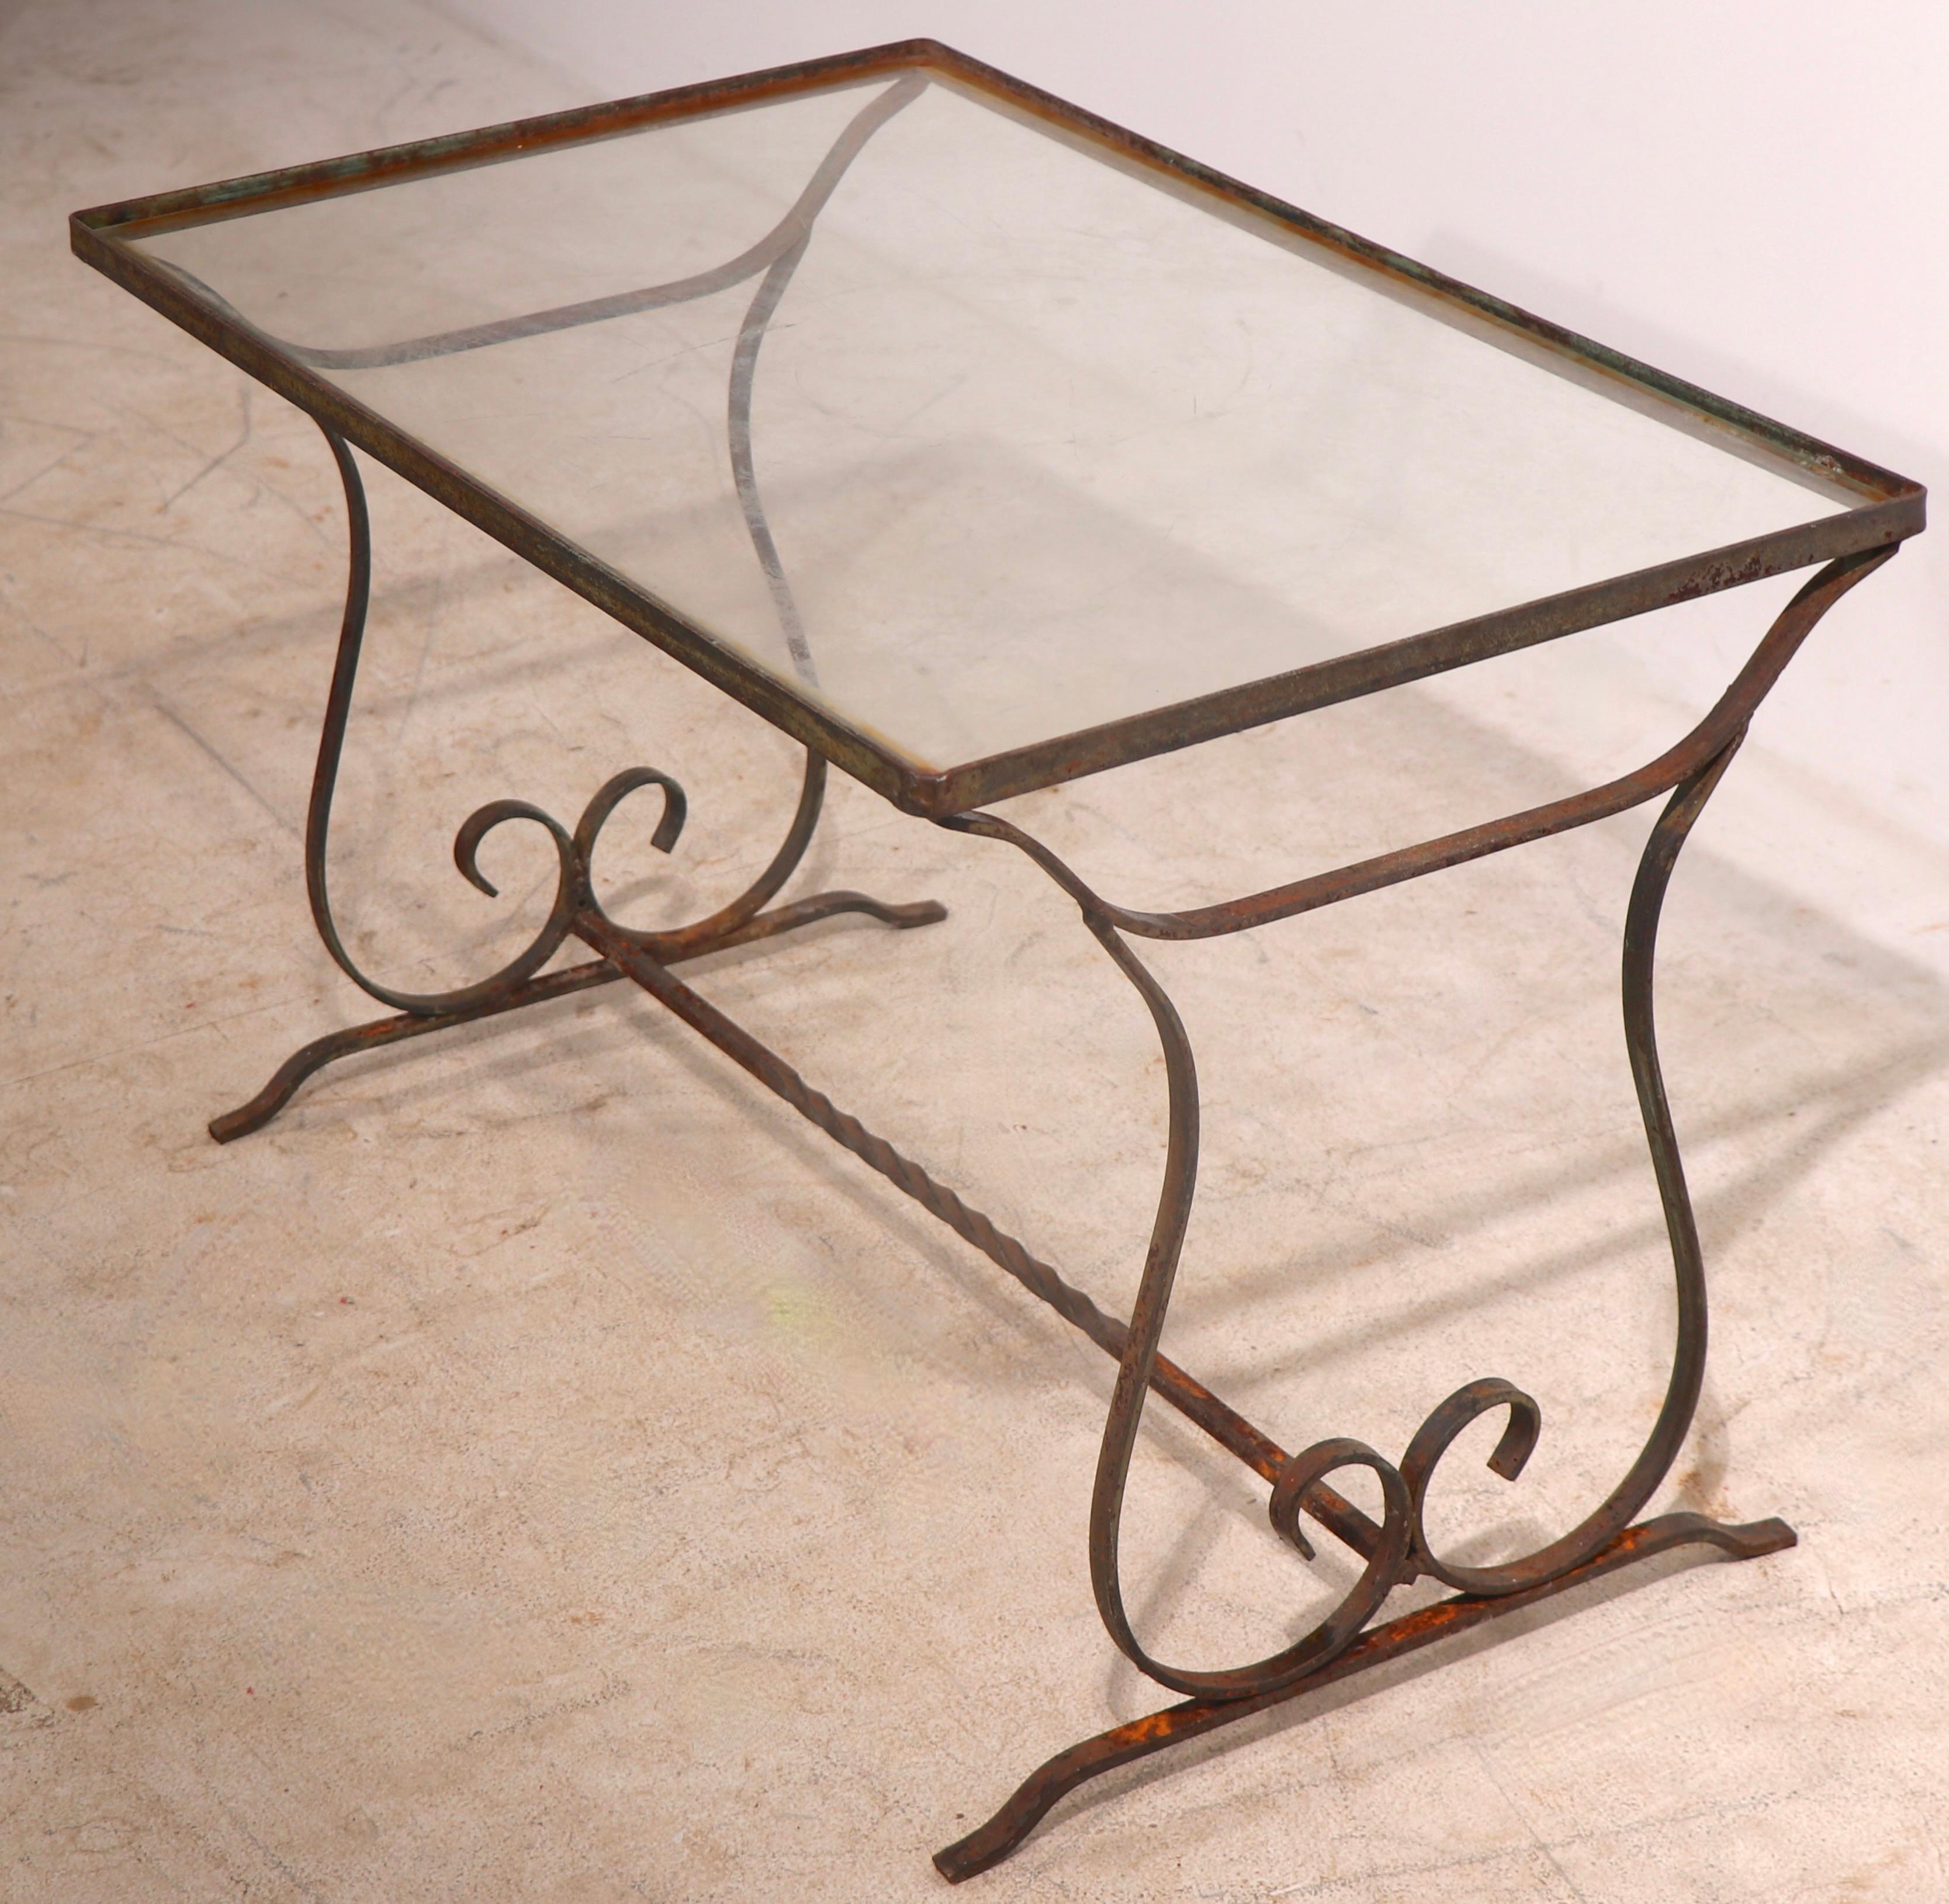 Charming diminutive garden, patio, poolside table of wrought iron and glass. The table features opposing curlicue form supports, with a twisted metal center stretcher. The top is glass, which shows some minor imperfections, usable as is, or easily